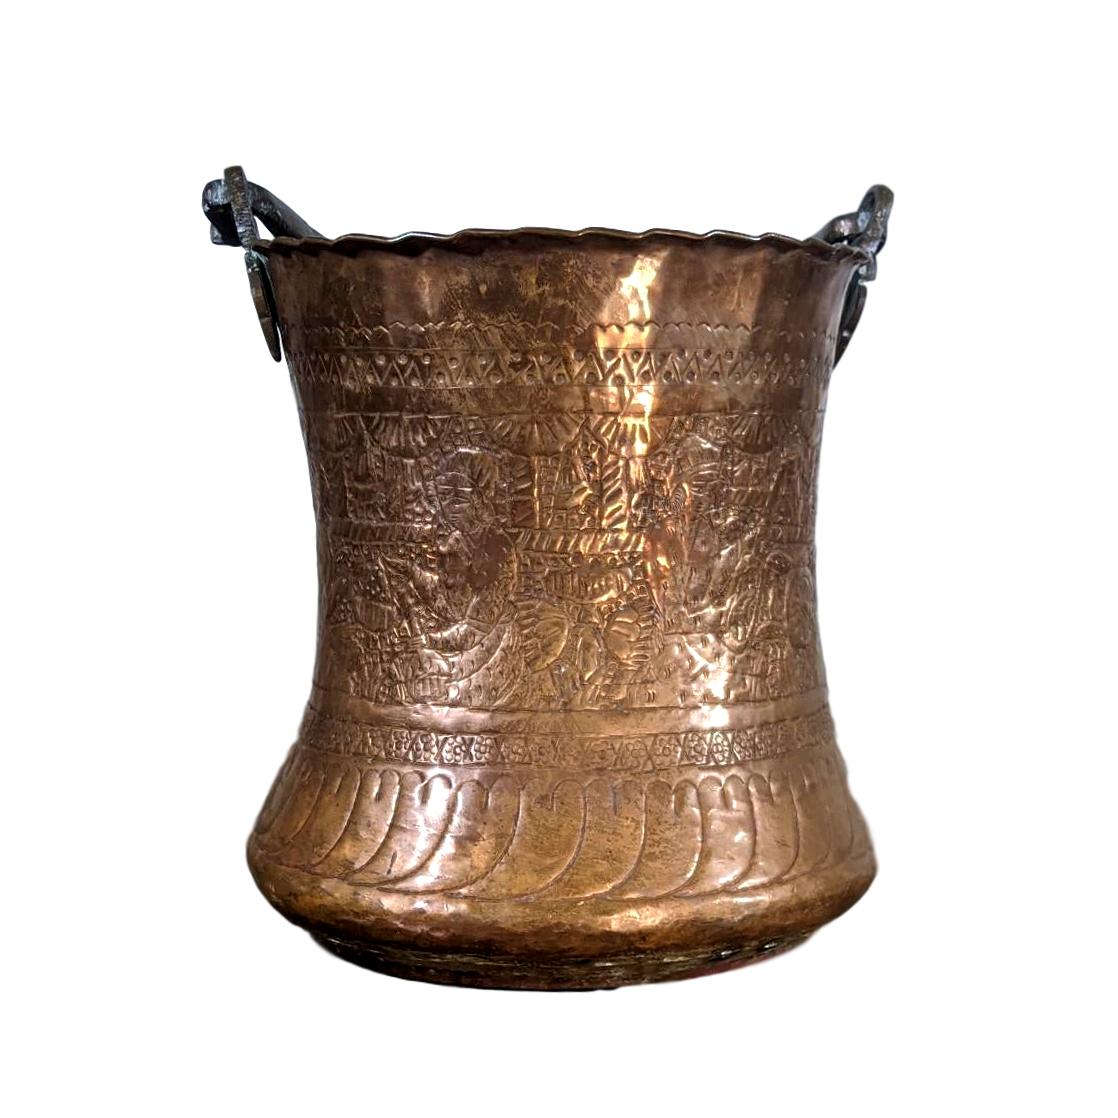 Large Safavid Etched Copper Bucket, Persia, 18th Century